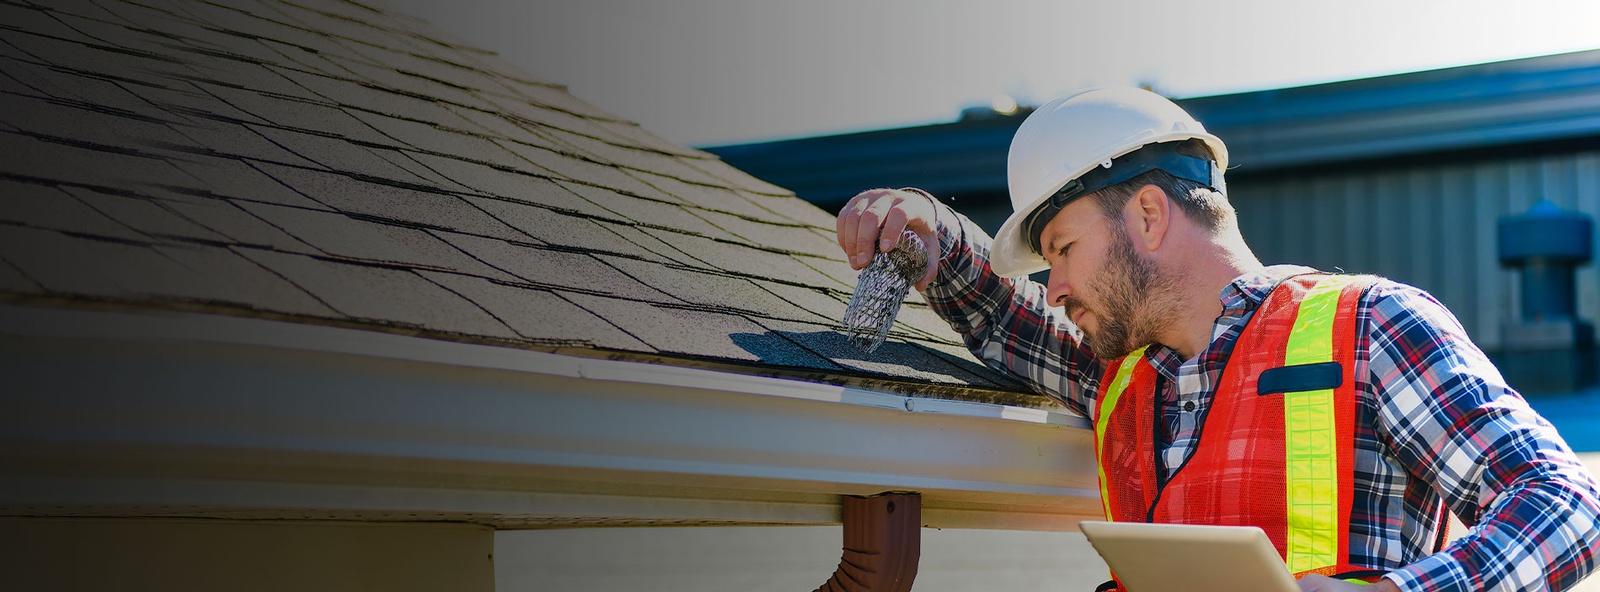 Home Roof & Chimney Inspection Services